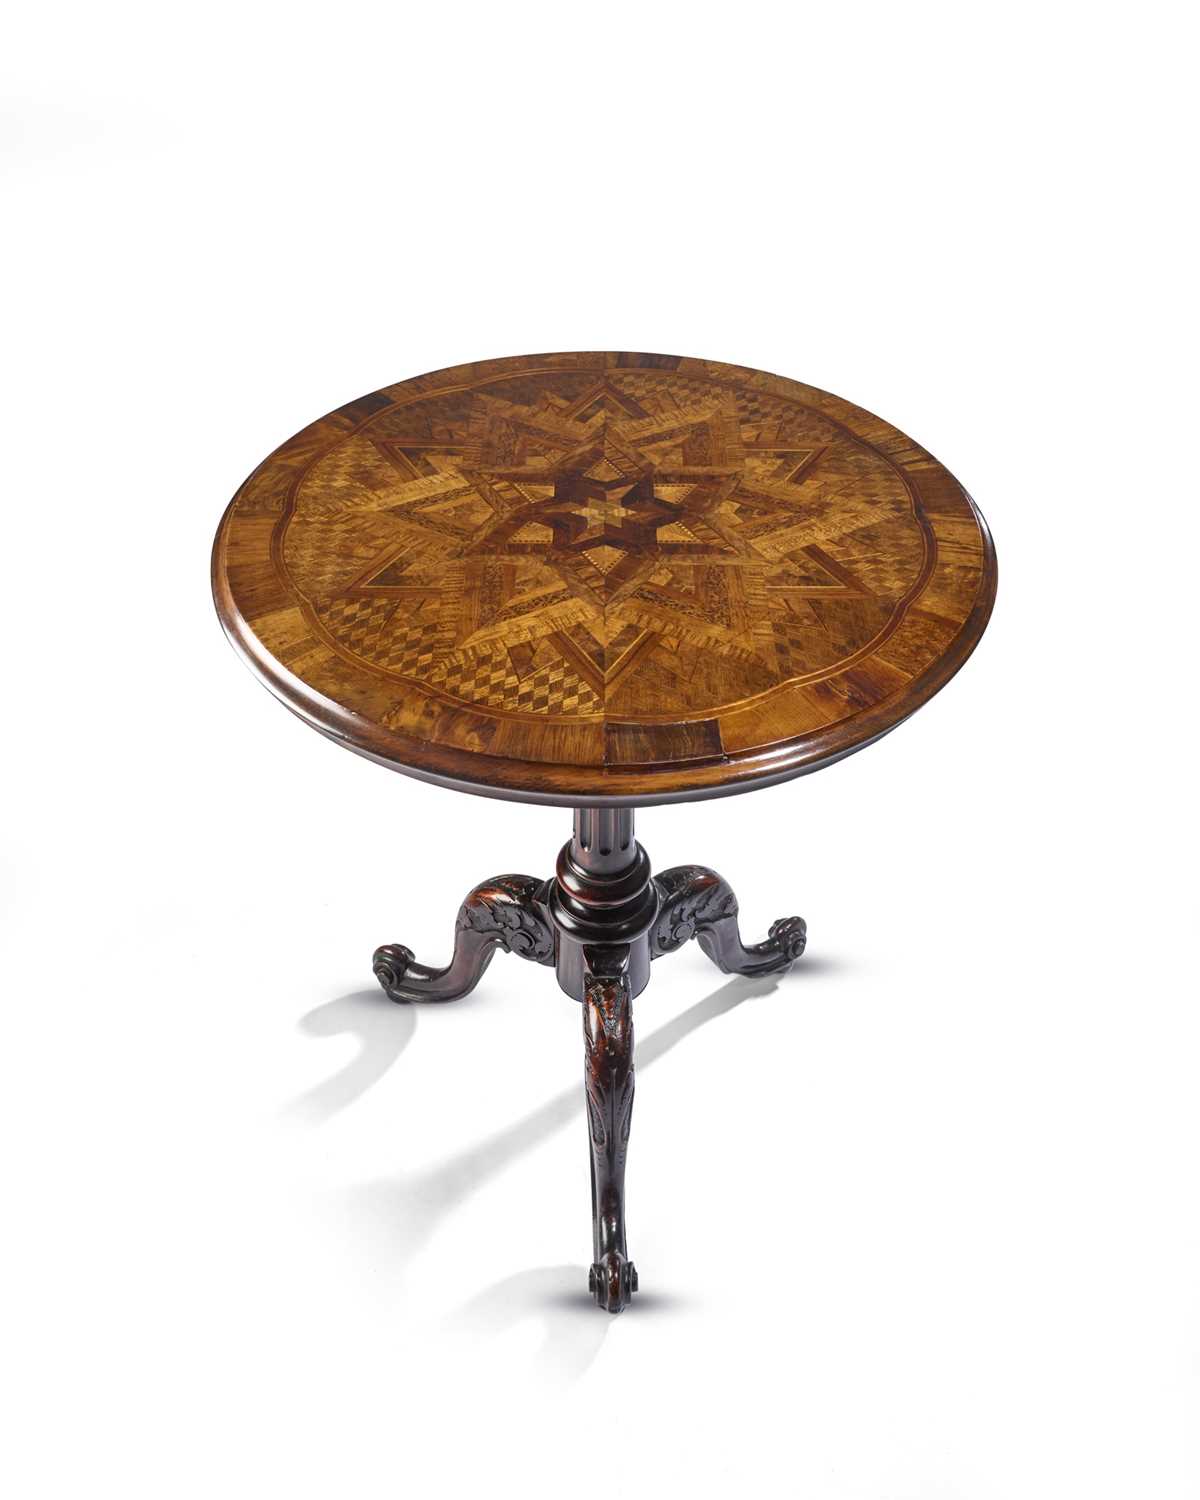 A RARE NEW ZEALAND NATIVE SPECIMEN WOOD PARQUETRY 'CARD' TABLE BY ANTON SEUFFERT, AUCKLAND, DATED '